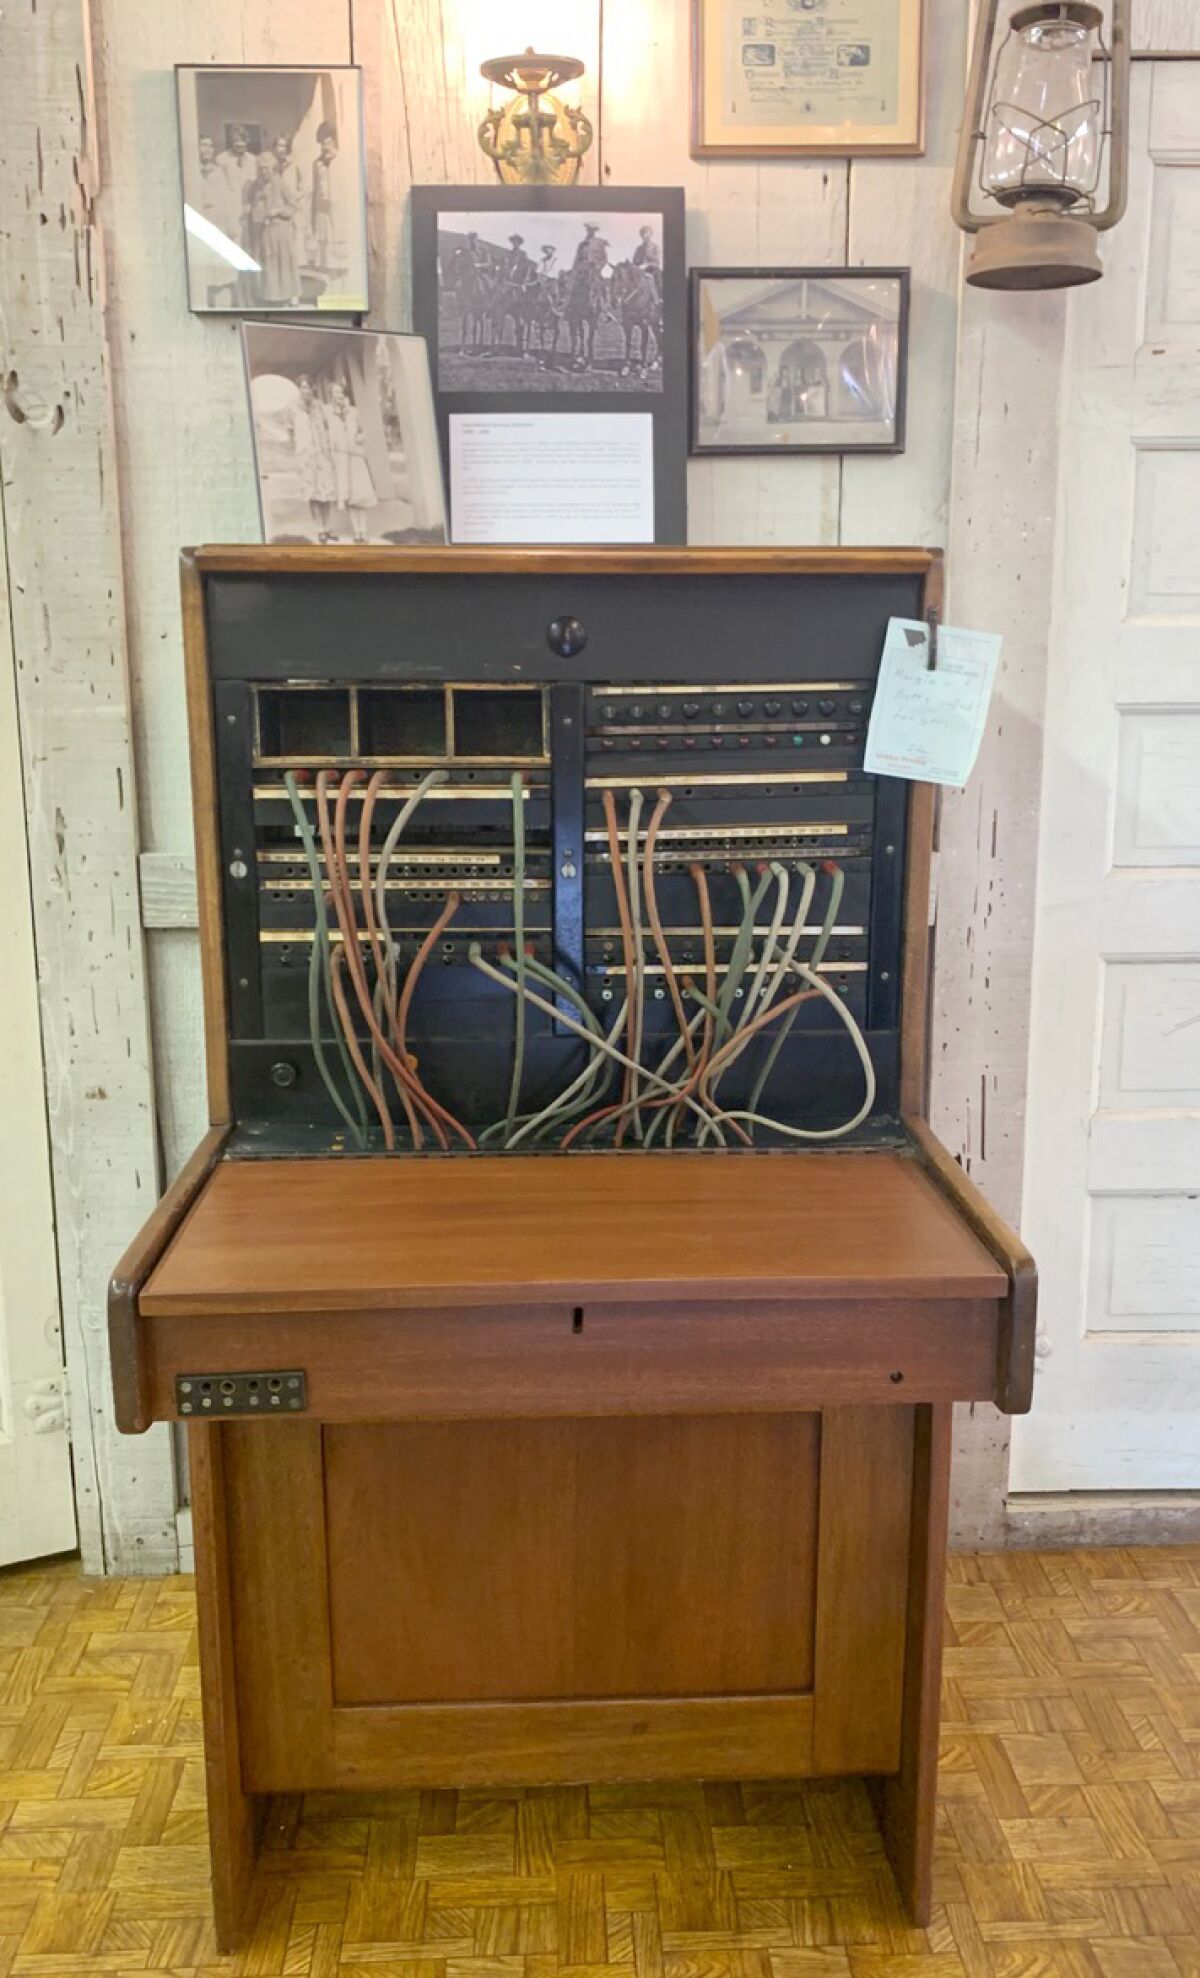 Telephone company employees who used this switchboard were nearly always women.